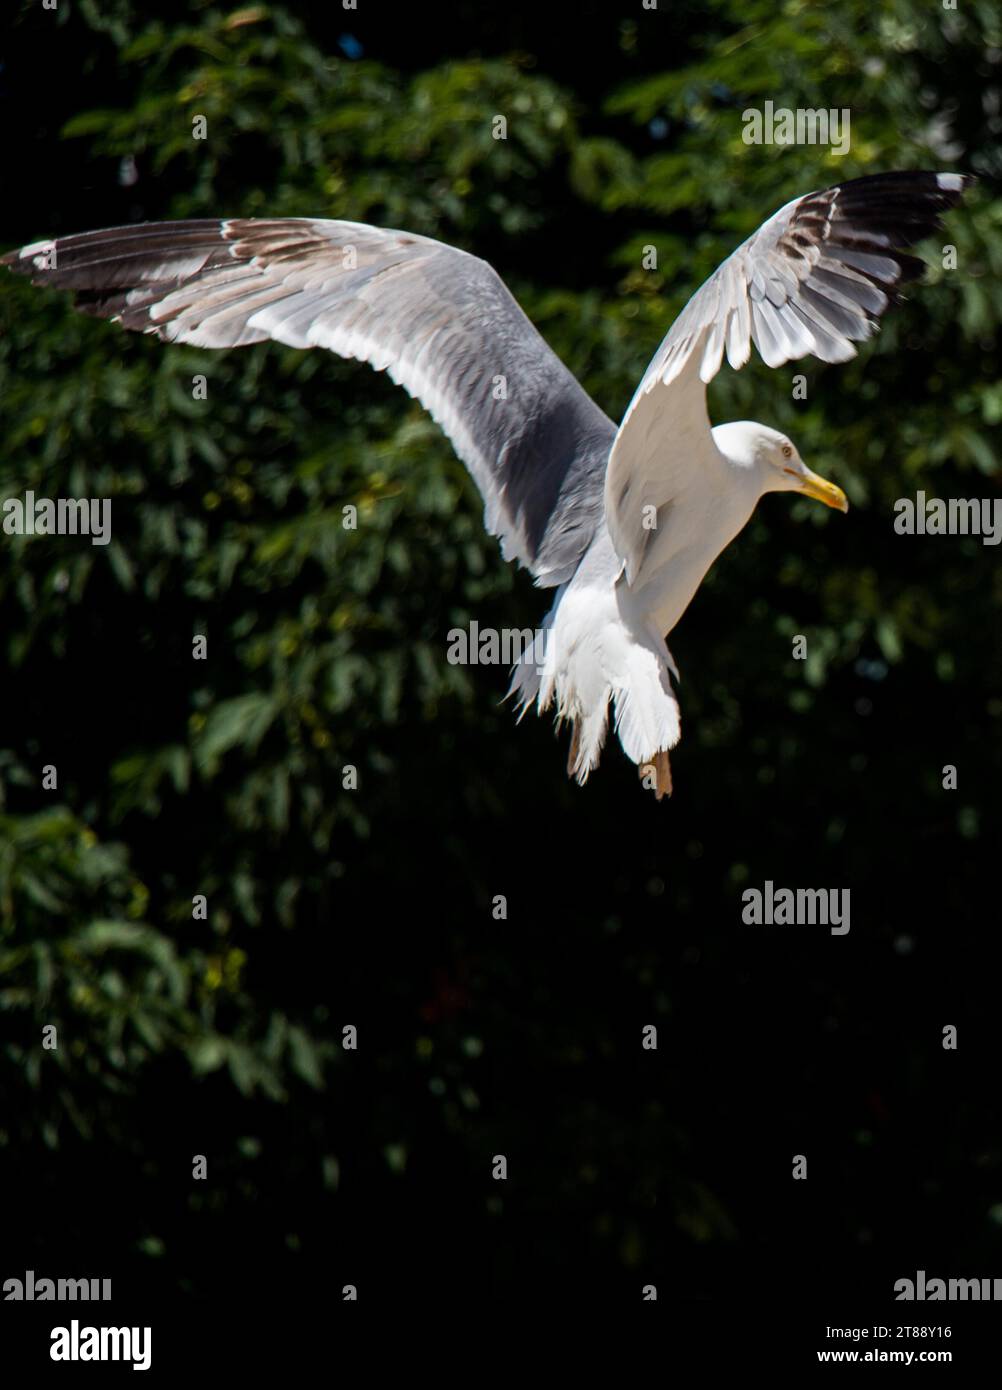 Seagull flying over the trees in the garden Stock Photo